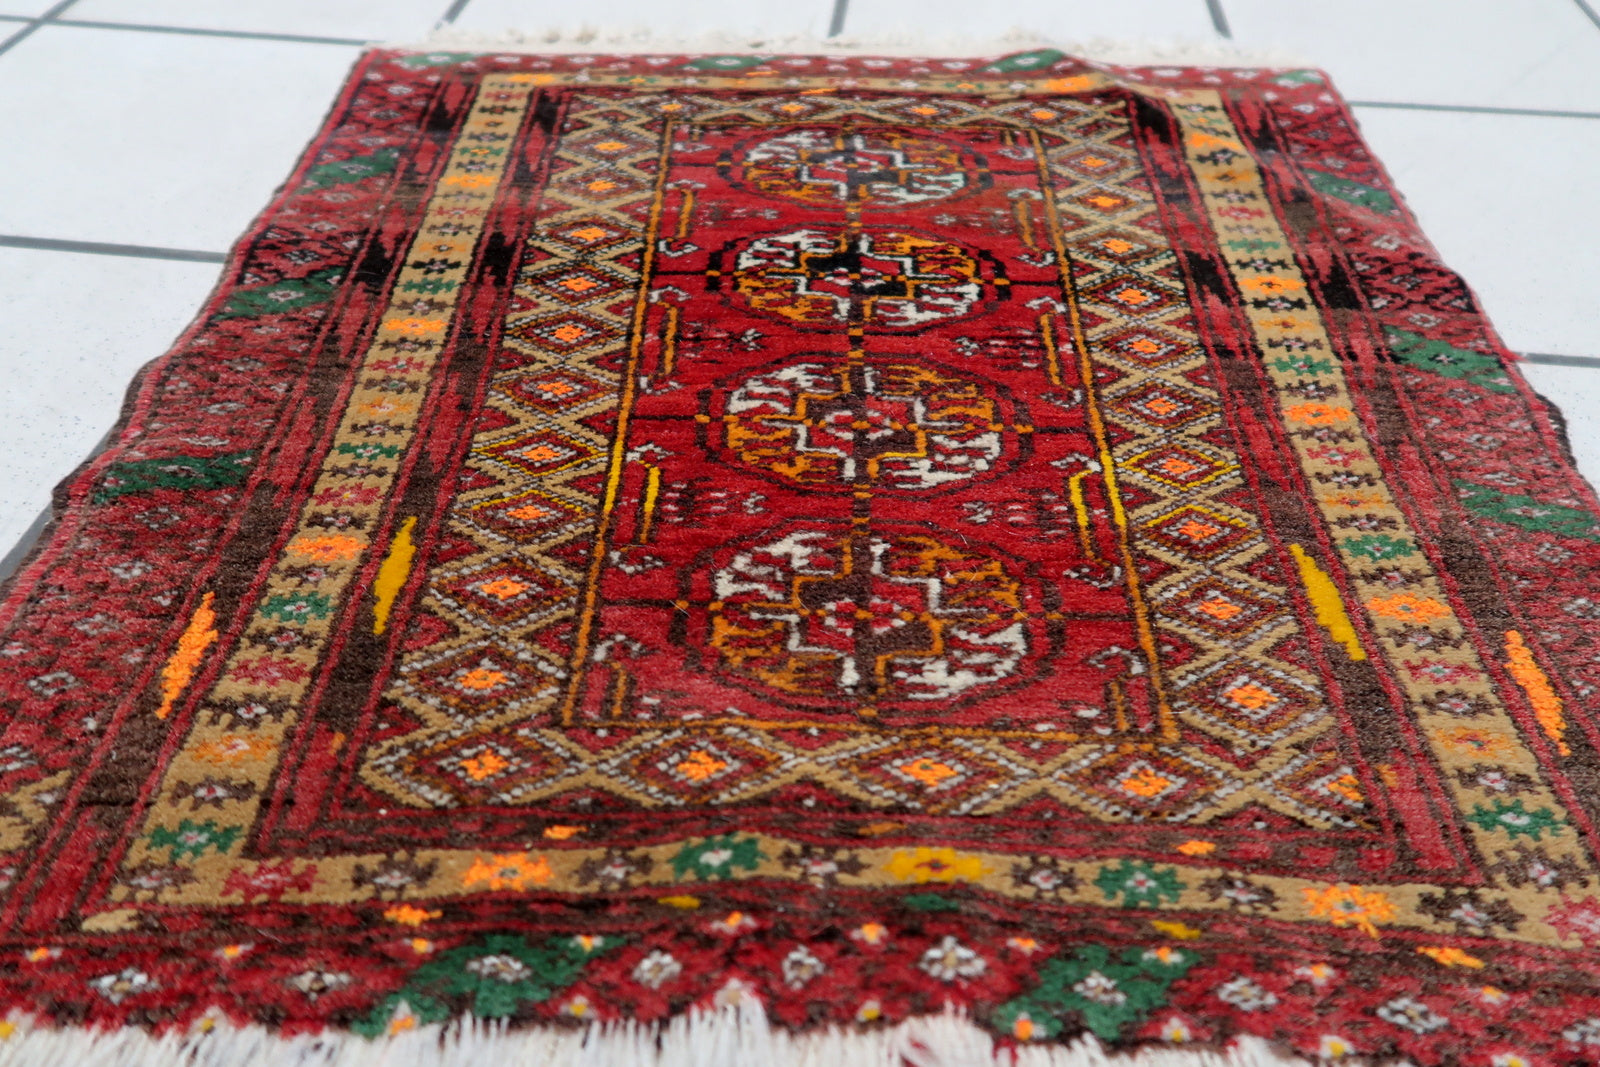 Detailed view of the compact size and texture of the vintage Afghan Ersari mat